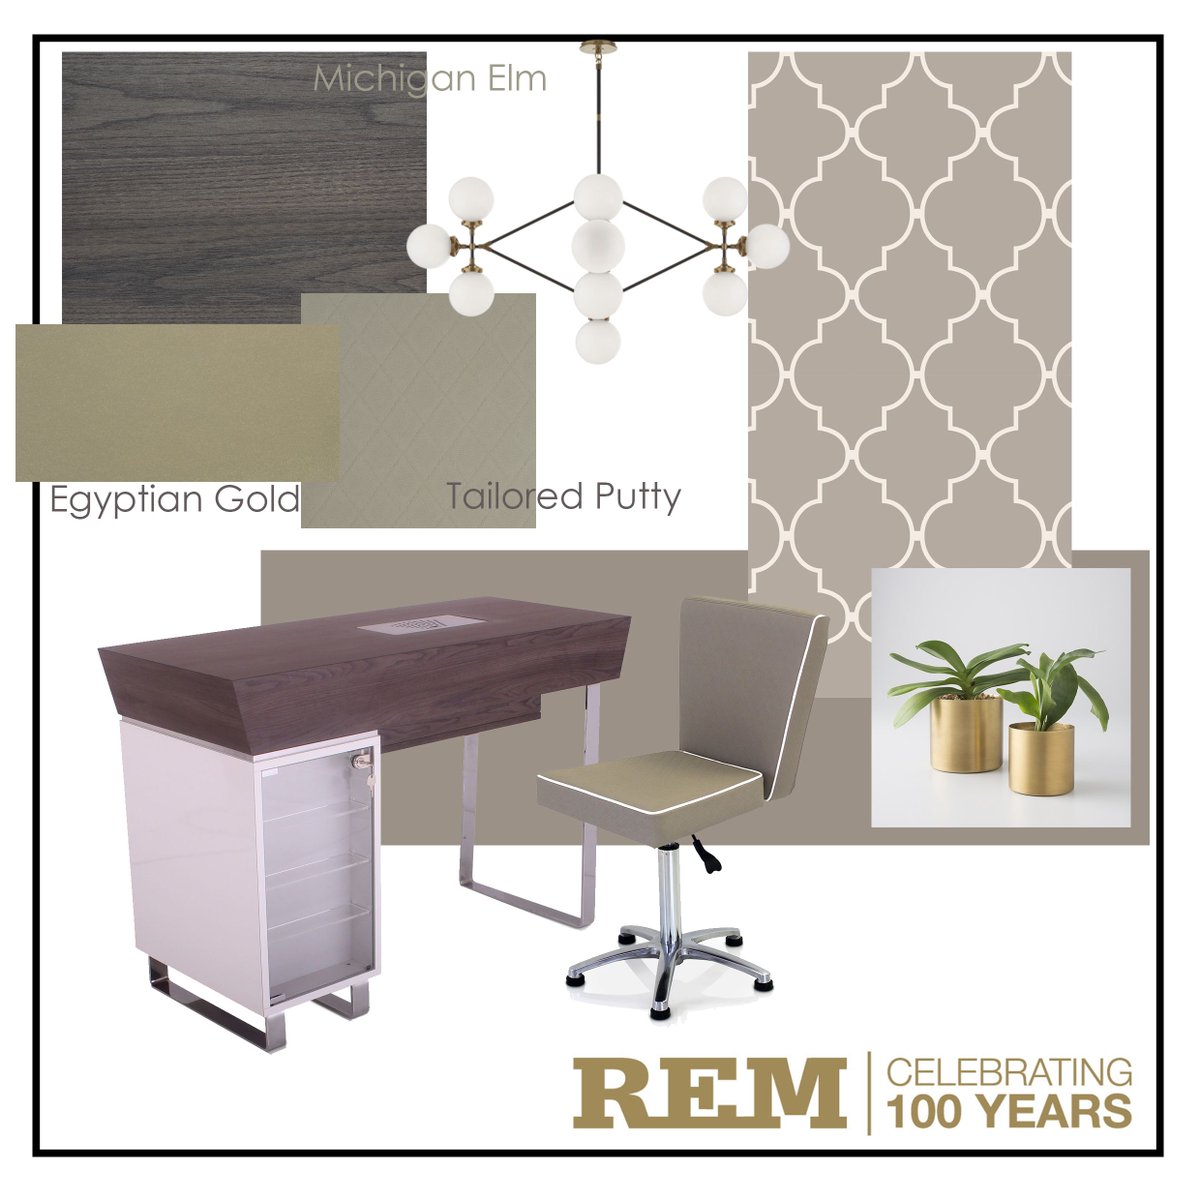 Rem Uk Salons On Twitter Have You Seen Our Centenary Range